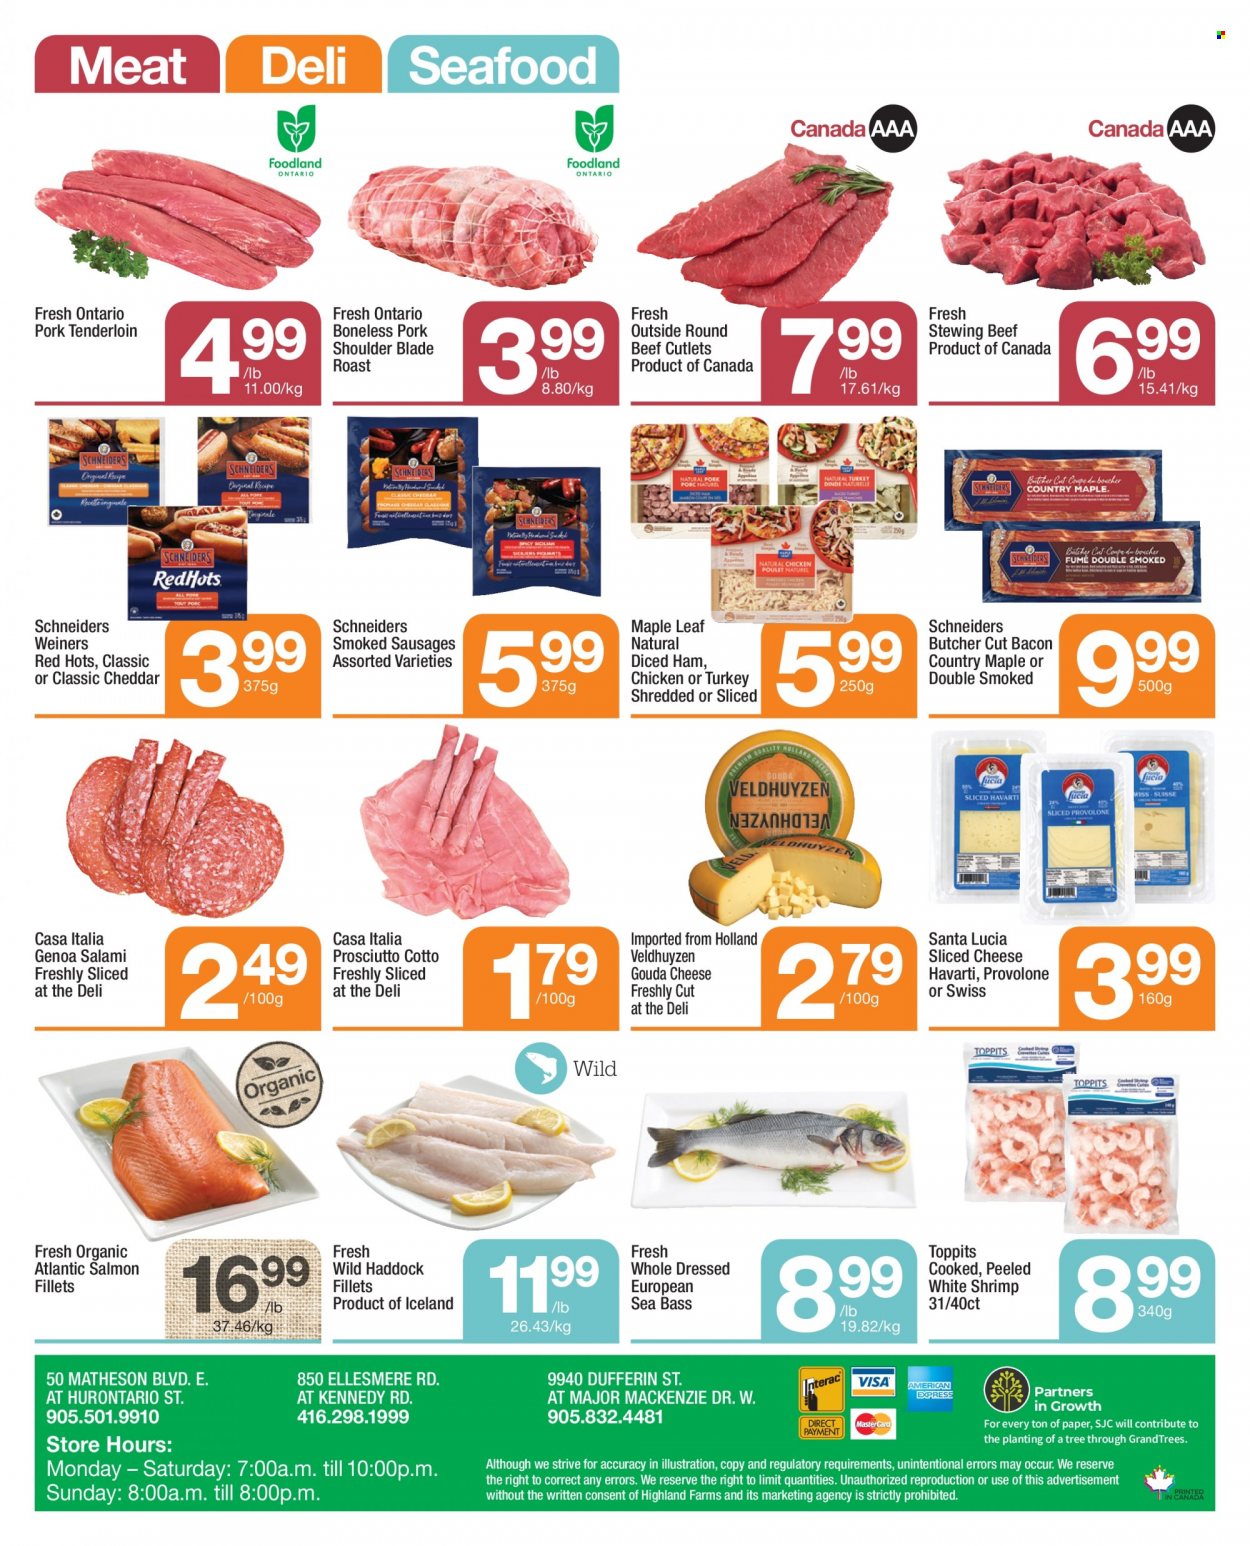 thumbnail - Highland Farms Flyer - September 23, 2021 - September 29, 2021 - Sales products - salmon, salmon fillet, sea bass, haddock, seafood, shrimps, bacon, salami, ham, prosciutto, sausage, gouda, sliced cheese, Havarti, cheddar, cheese, Provolone, Santa, beef meat, stewing beef, pork meat, pork shoulder, pork tenderloin. Page 4.